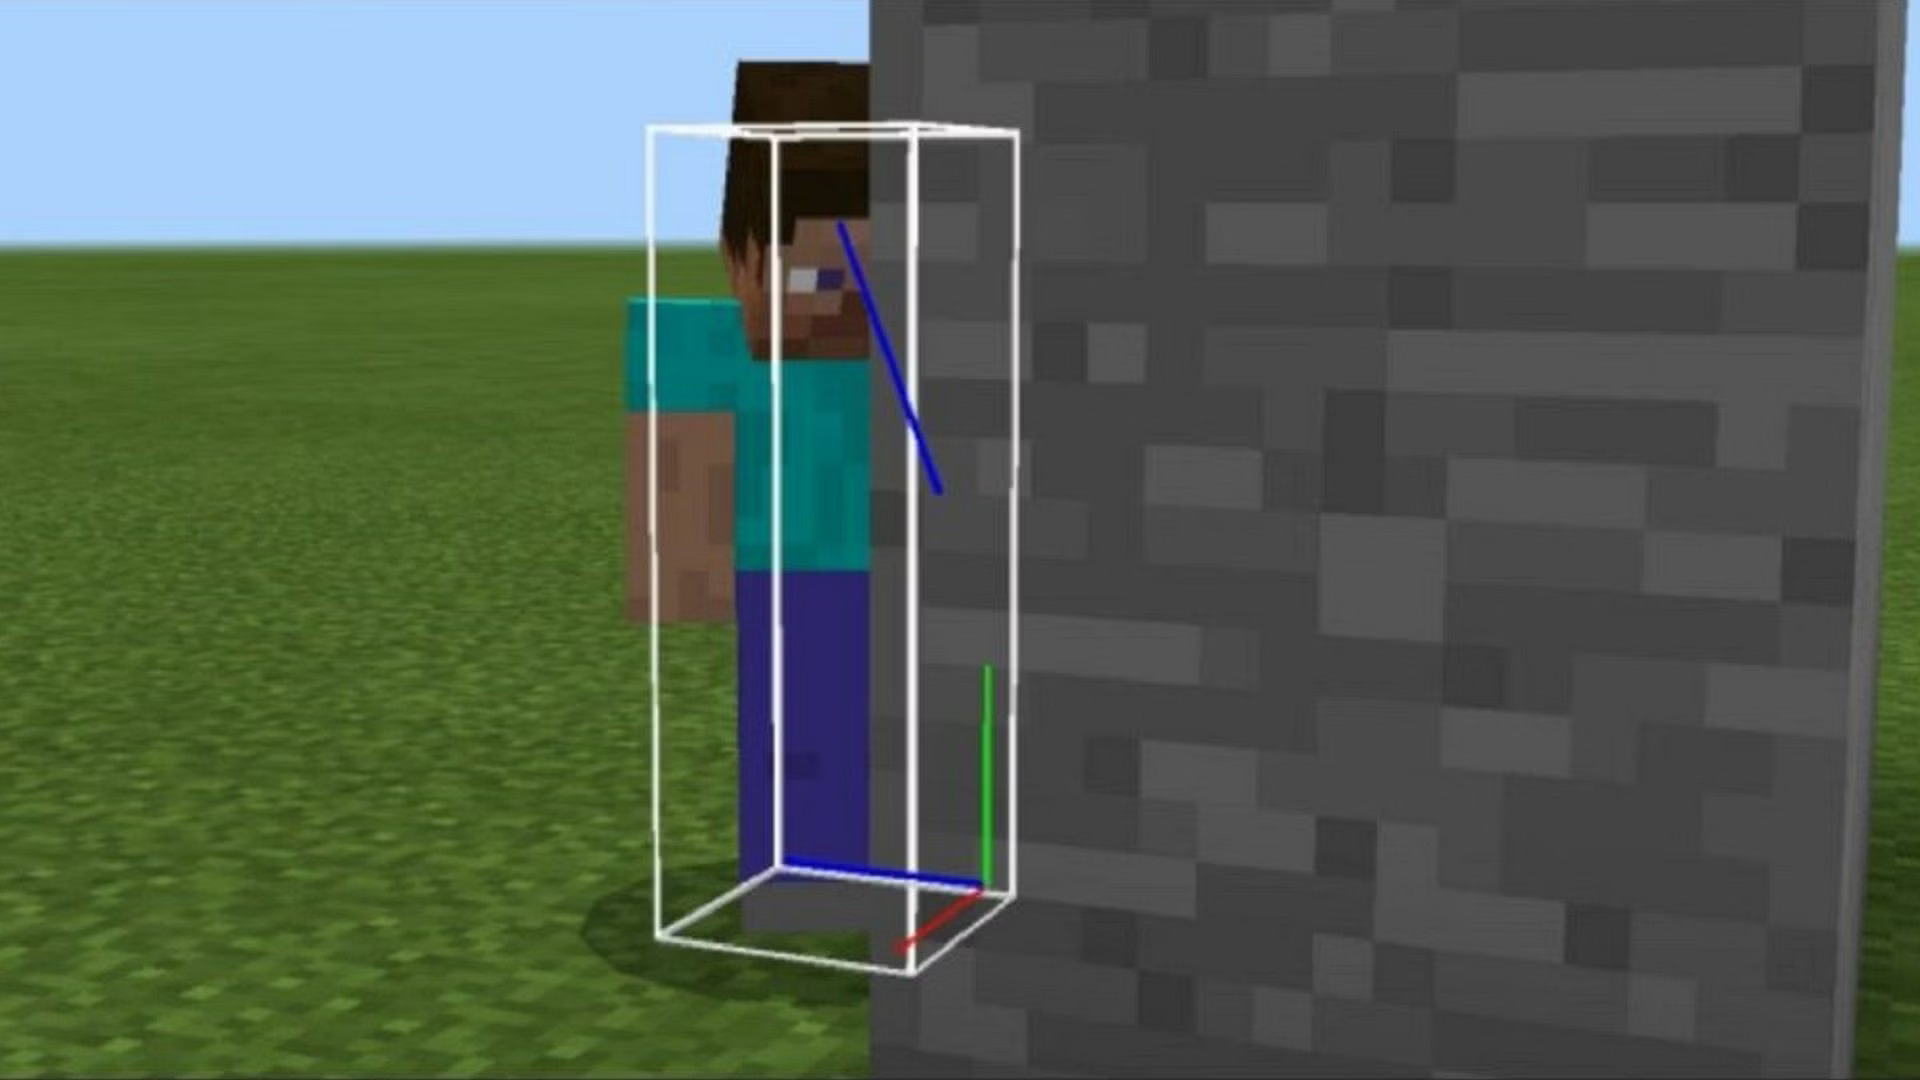 What are Hitboxes in Minecraft?